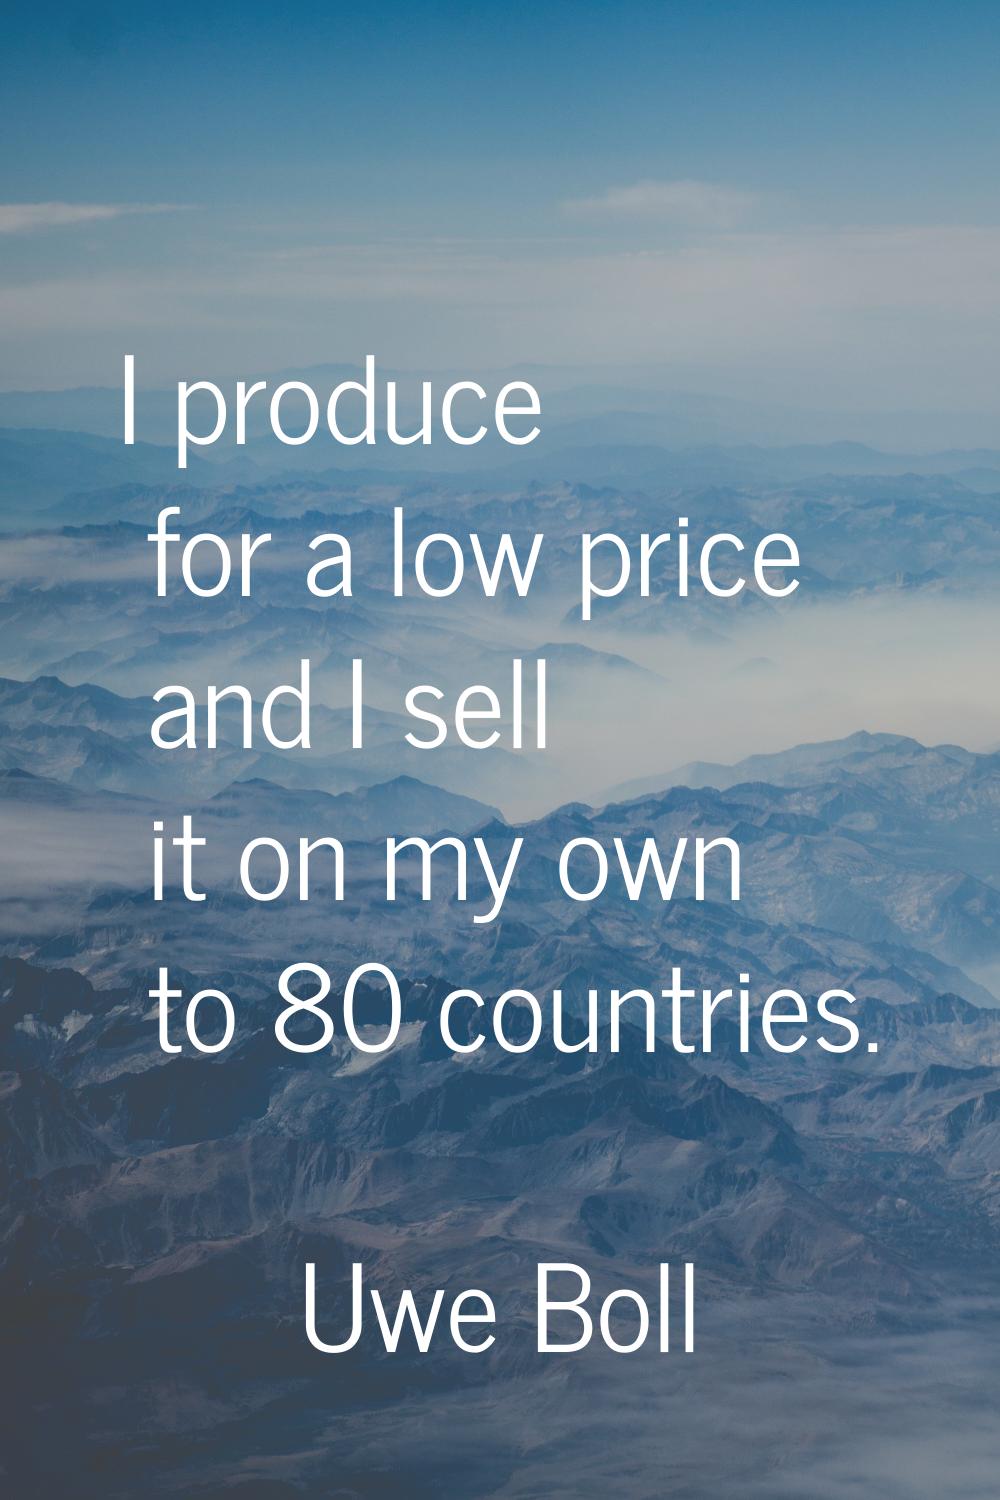 I produce for a low price and I sell it on my own to 80 countries.